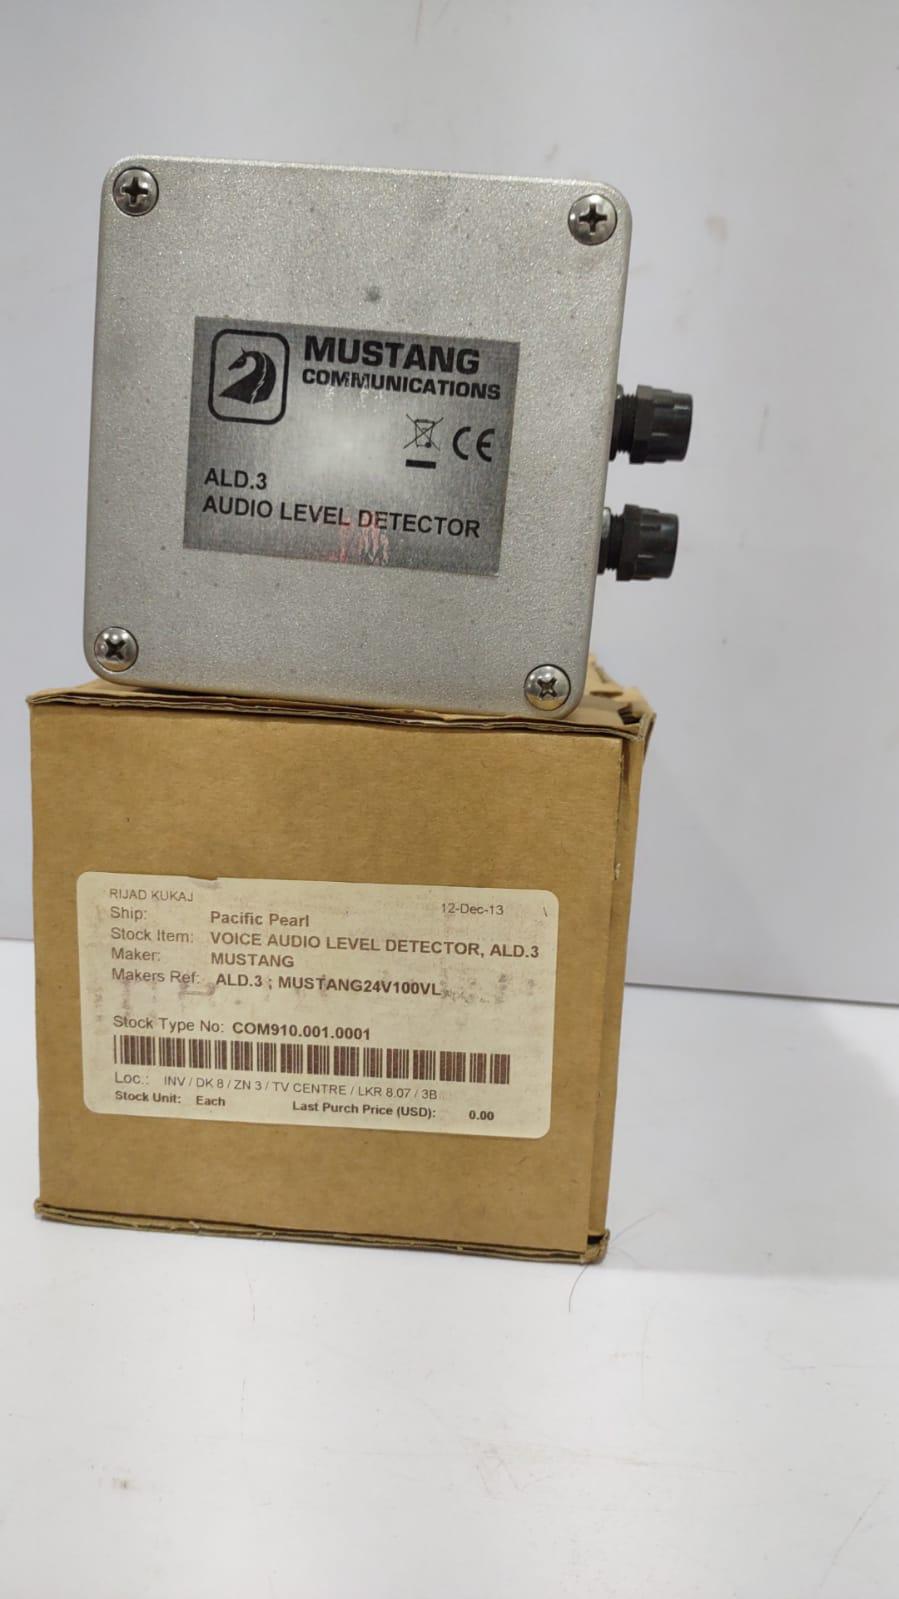 Mustang Communications ALD.3 Audio Level Detector